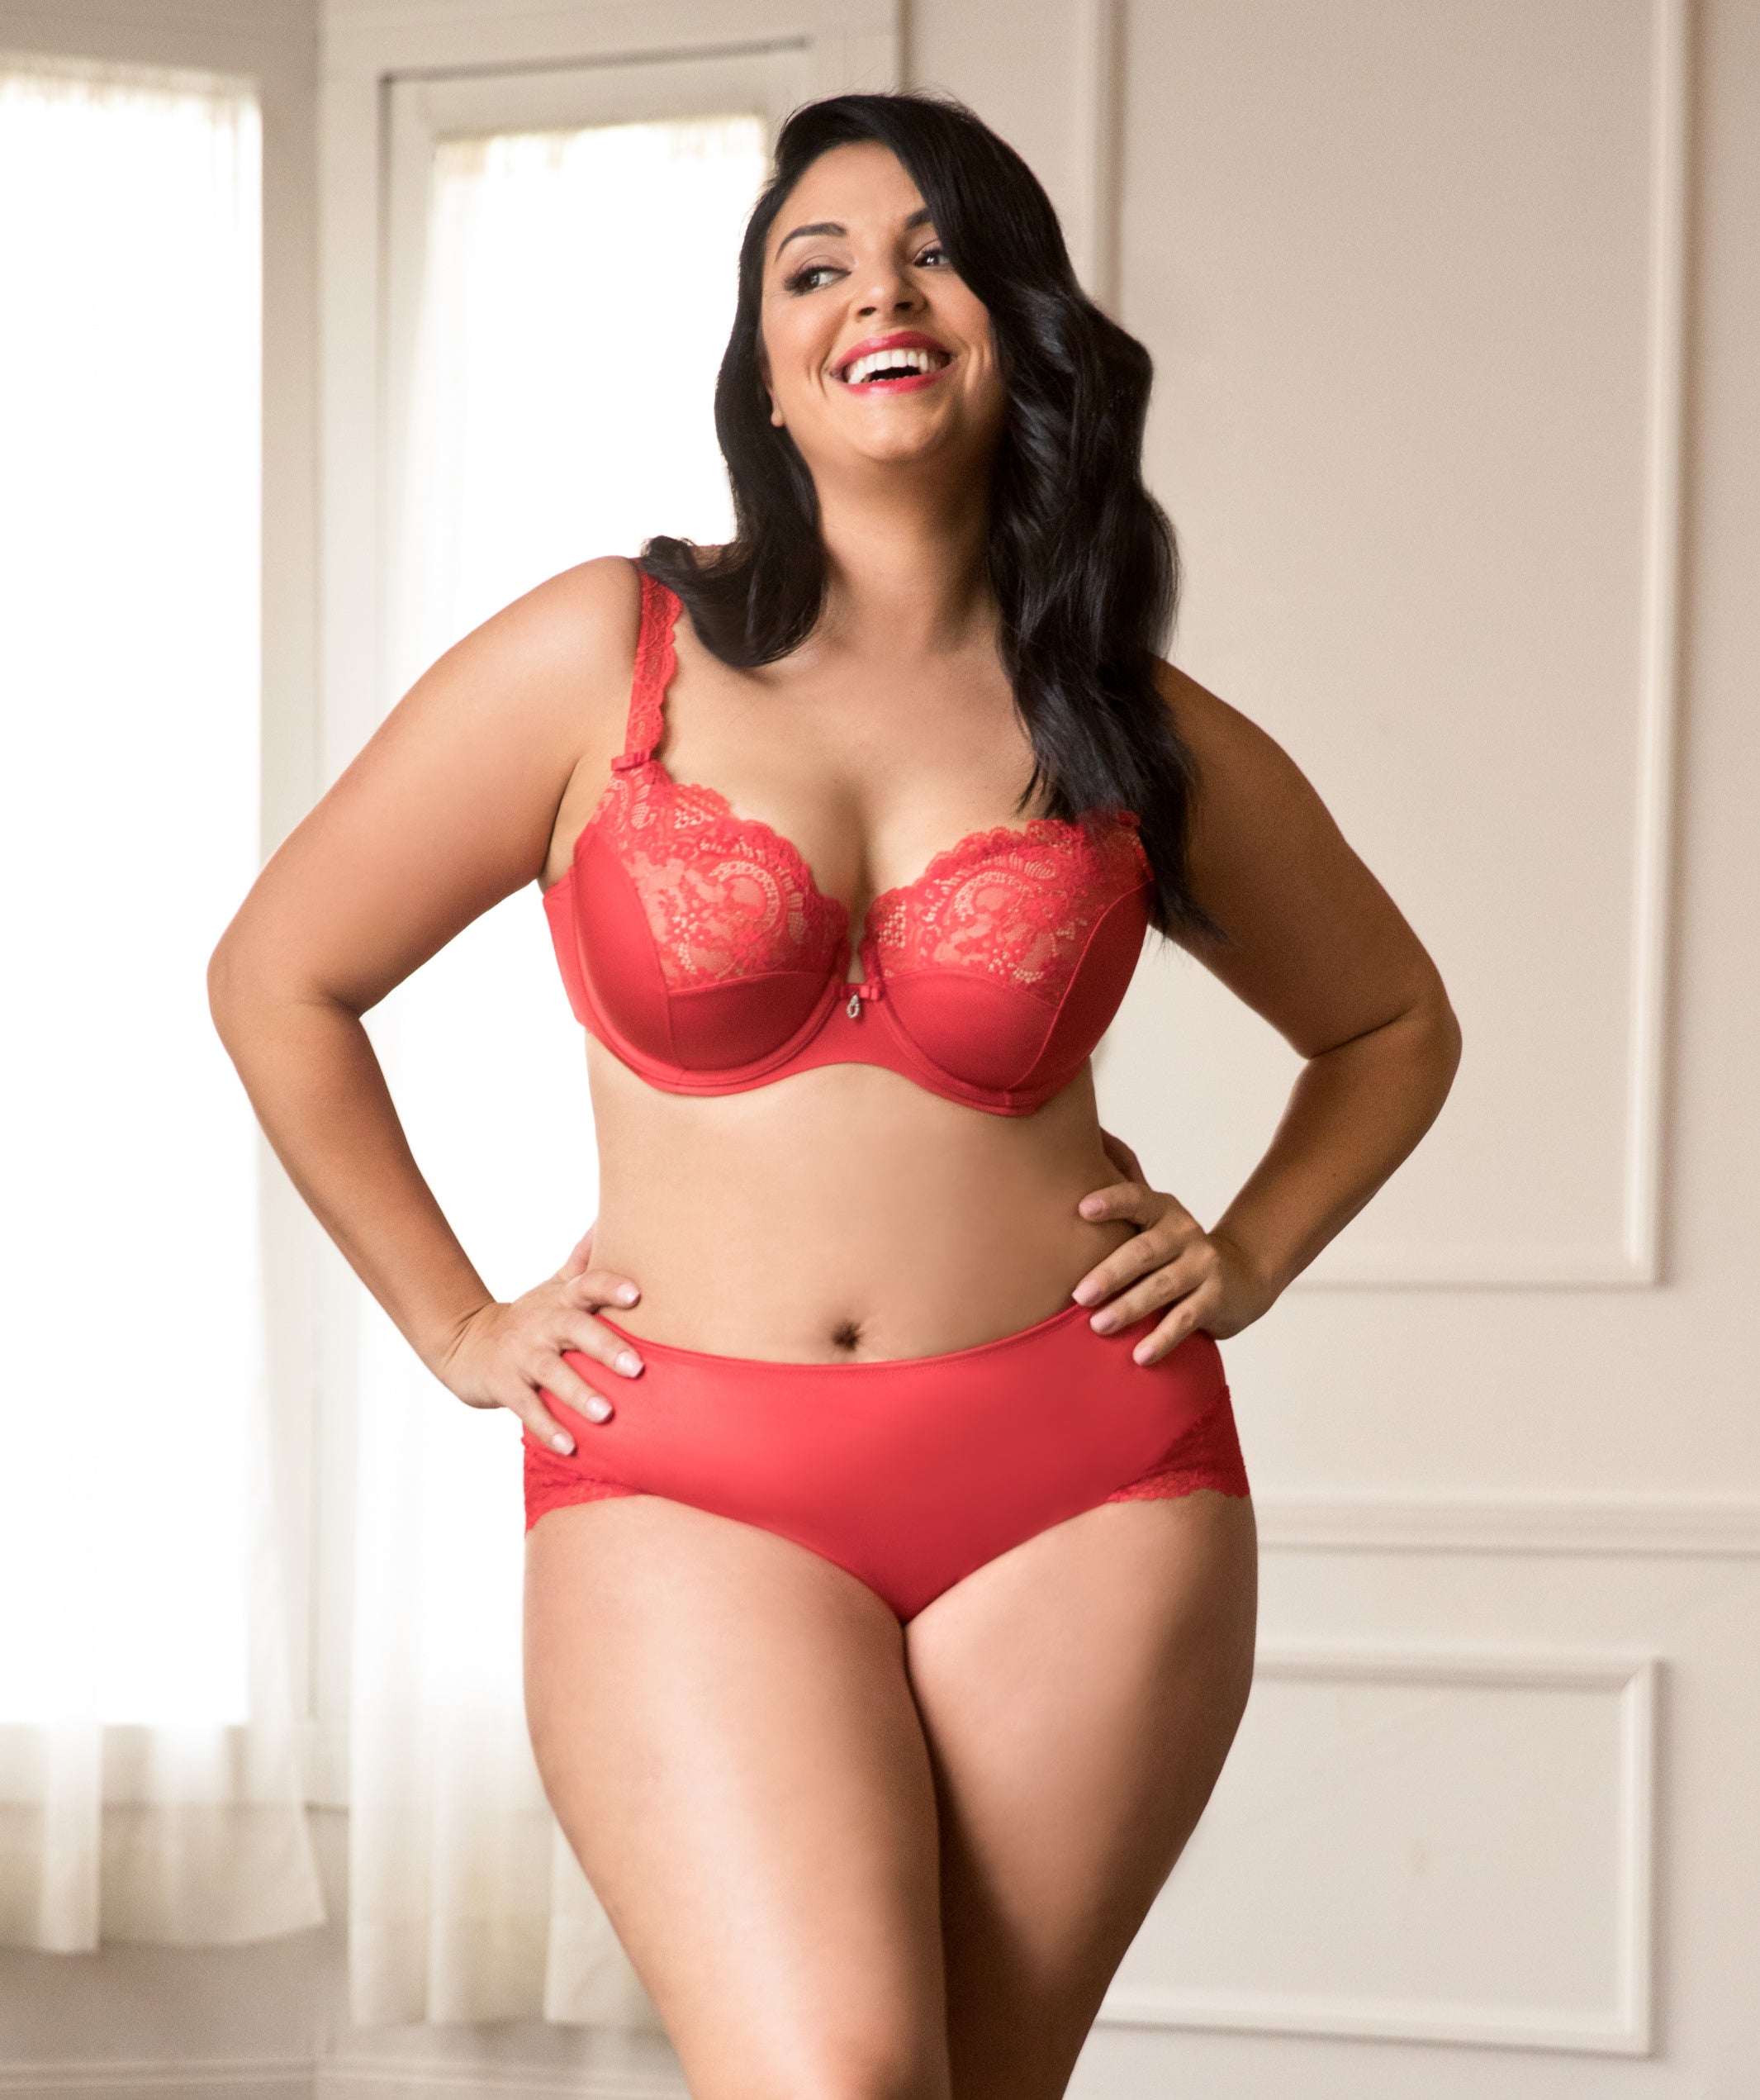 5 Plus Size Lingerie Inspirations We're Loving For Holiday – Curvy Couture